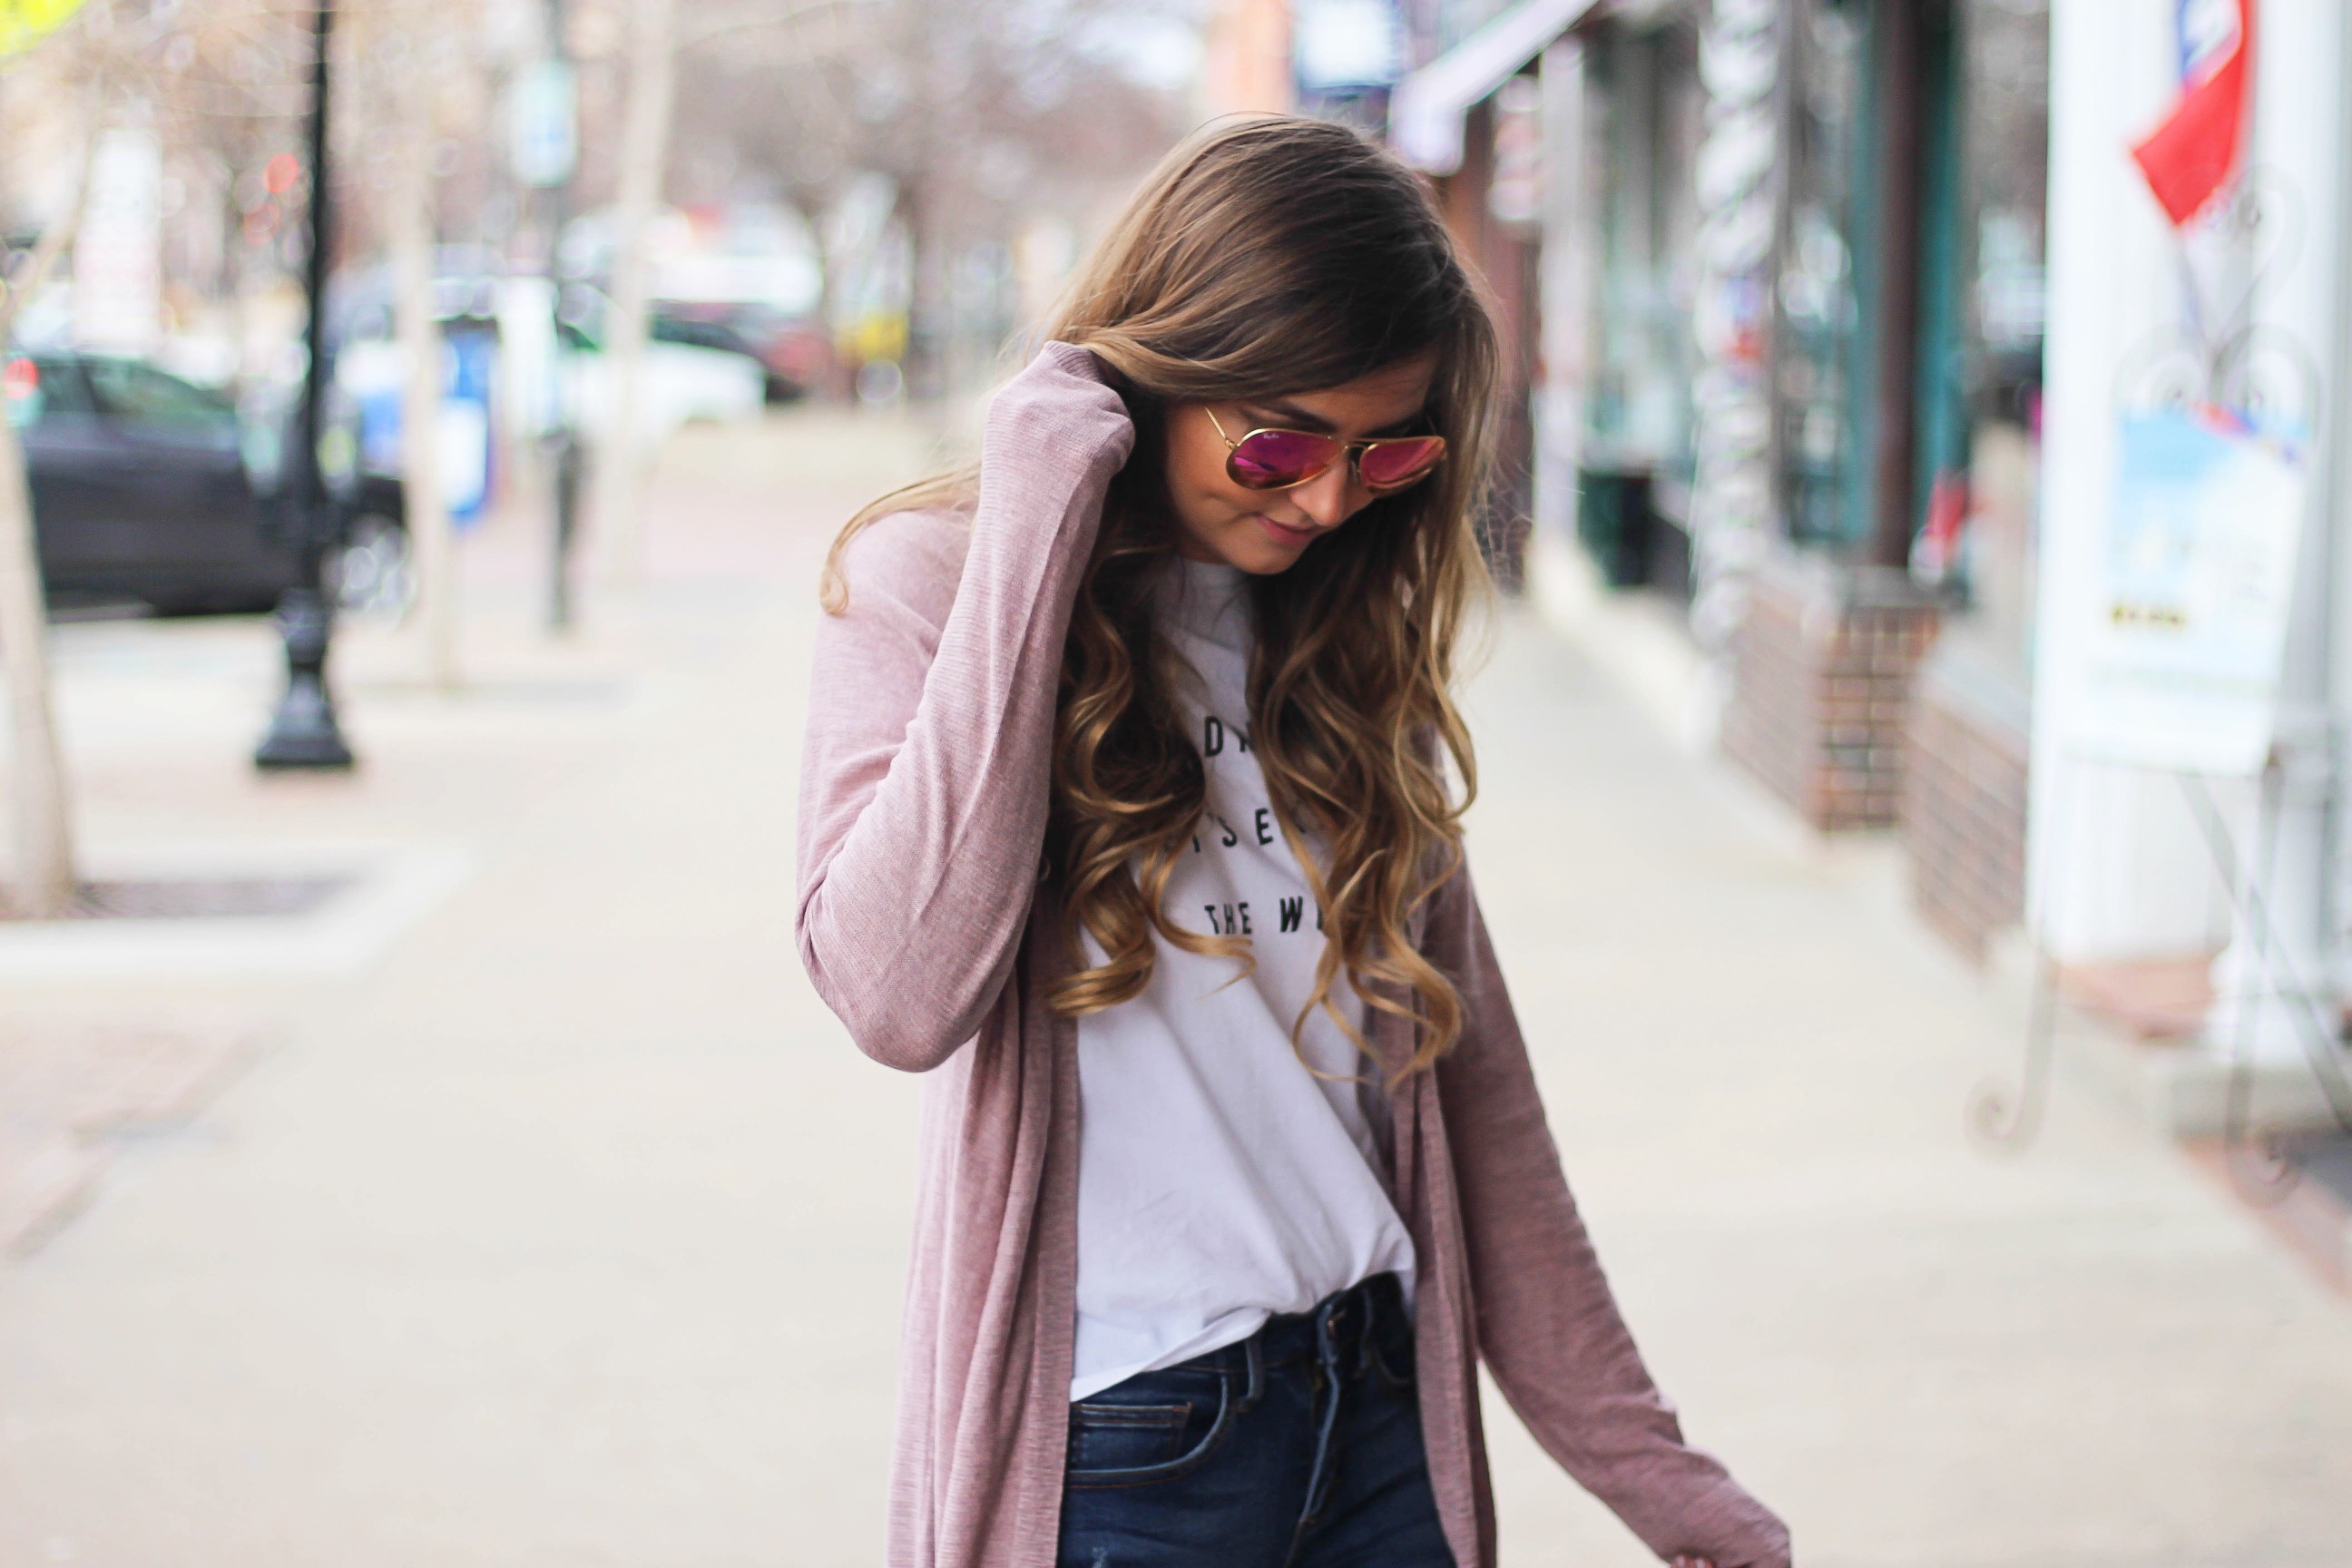 The cutest purple/pink cardigan for spring paired with my Oh Darling Let's Explore the World tee! I love this tee because it matches my wanderlust! I paired it with my favorite ripped jeans and tan suede booties. Plus of course my pink ray bans! By Lauren Lindmark on Daily Dose of Charm